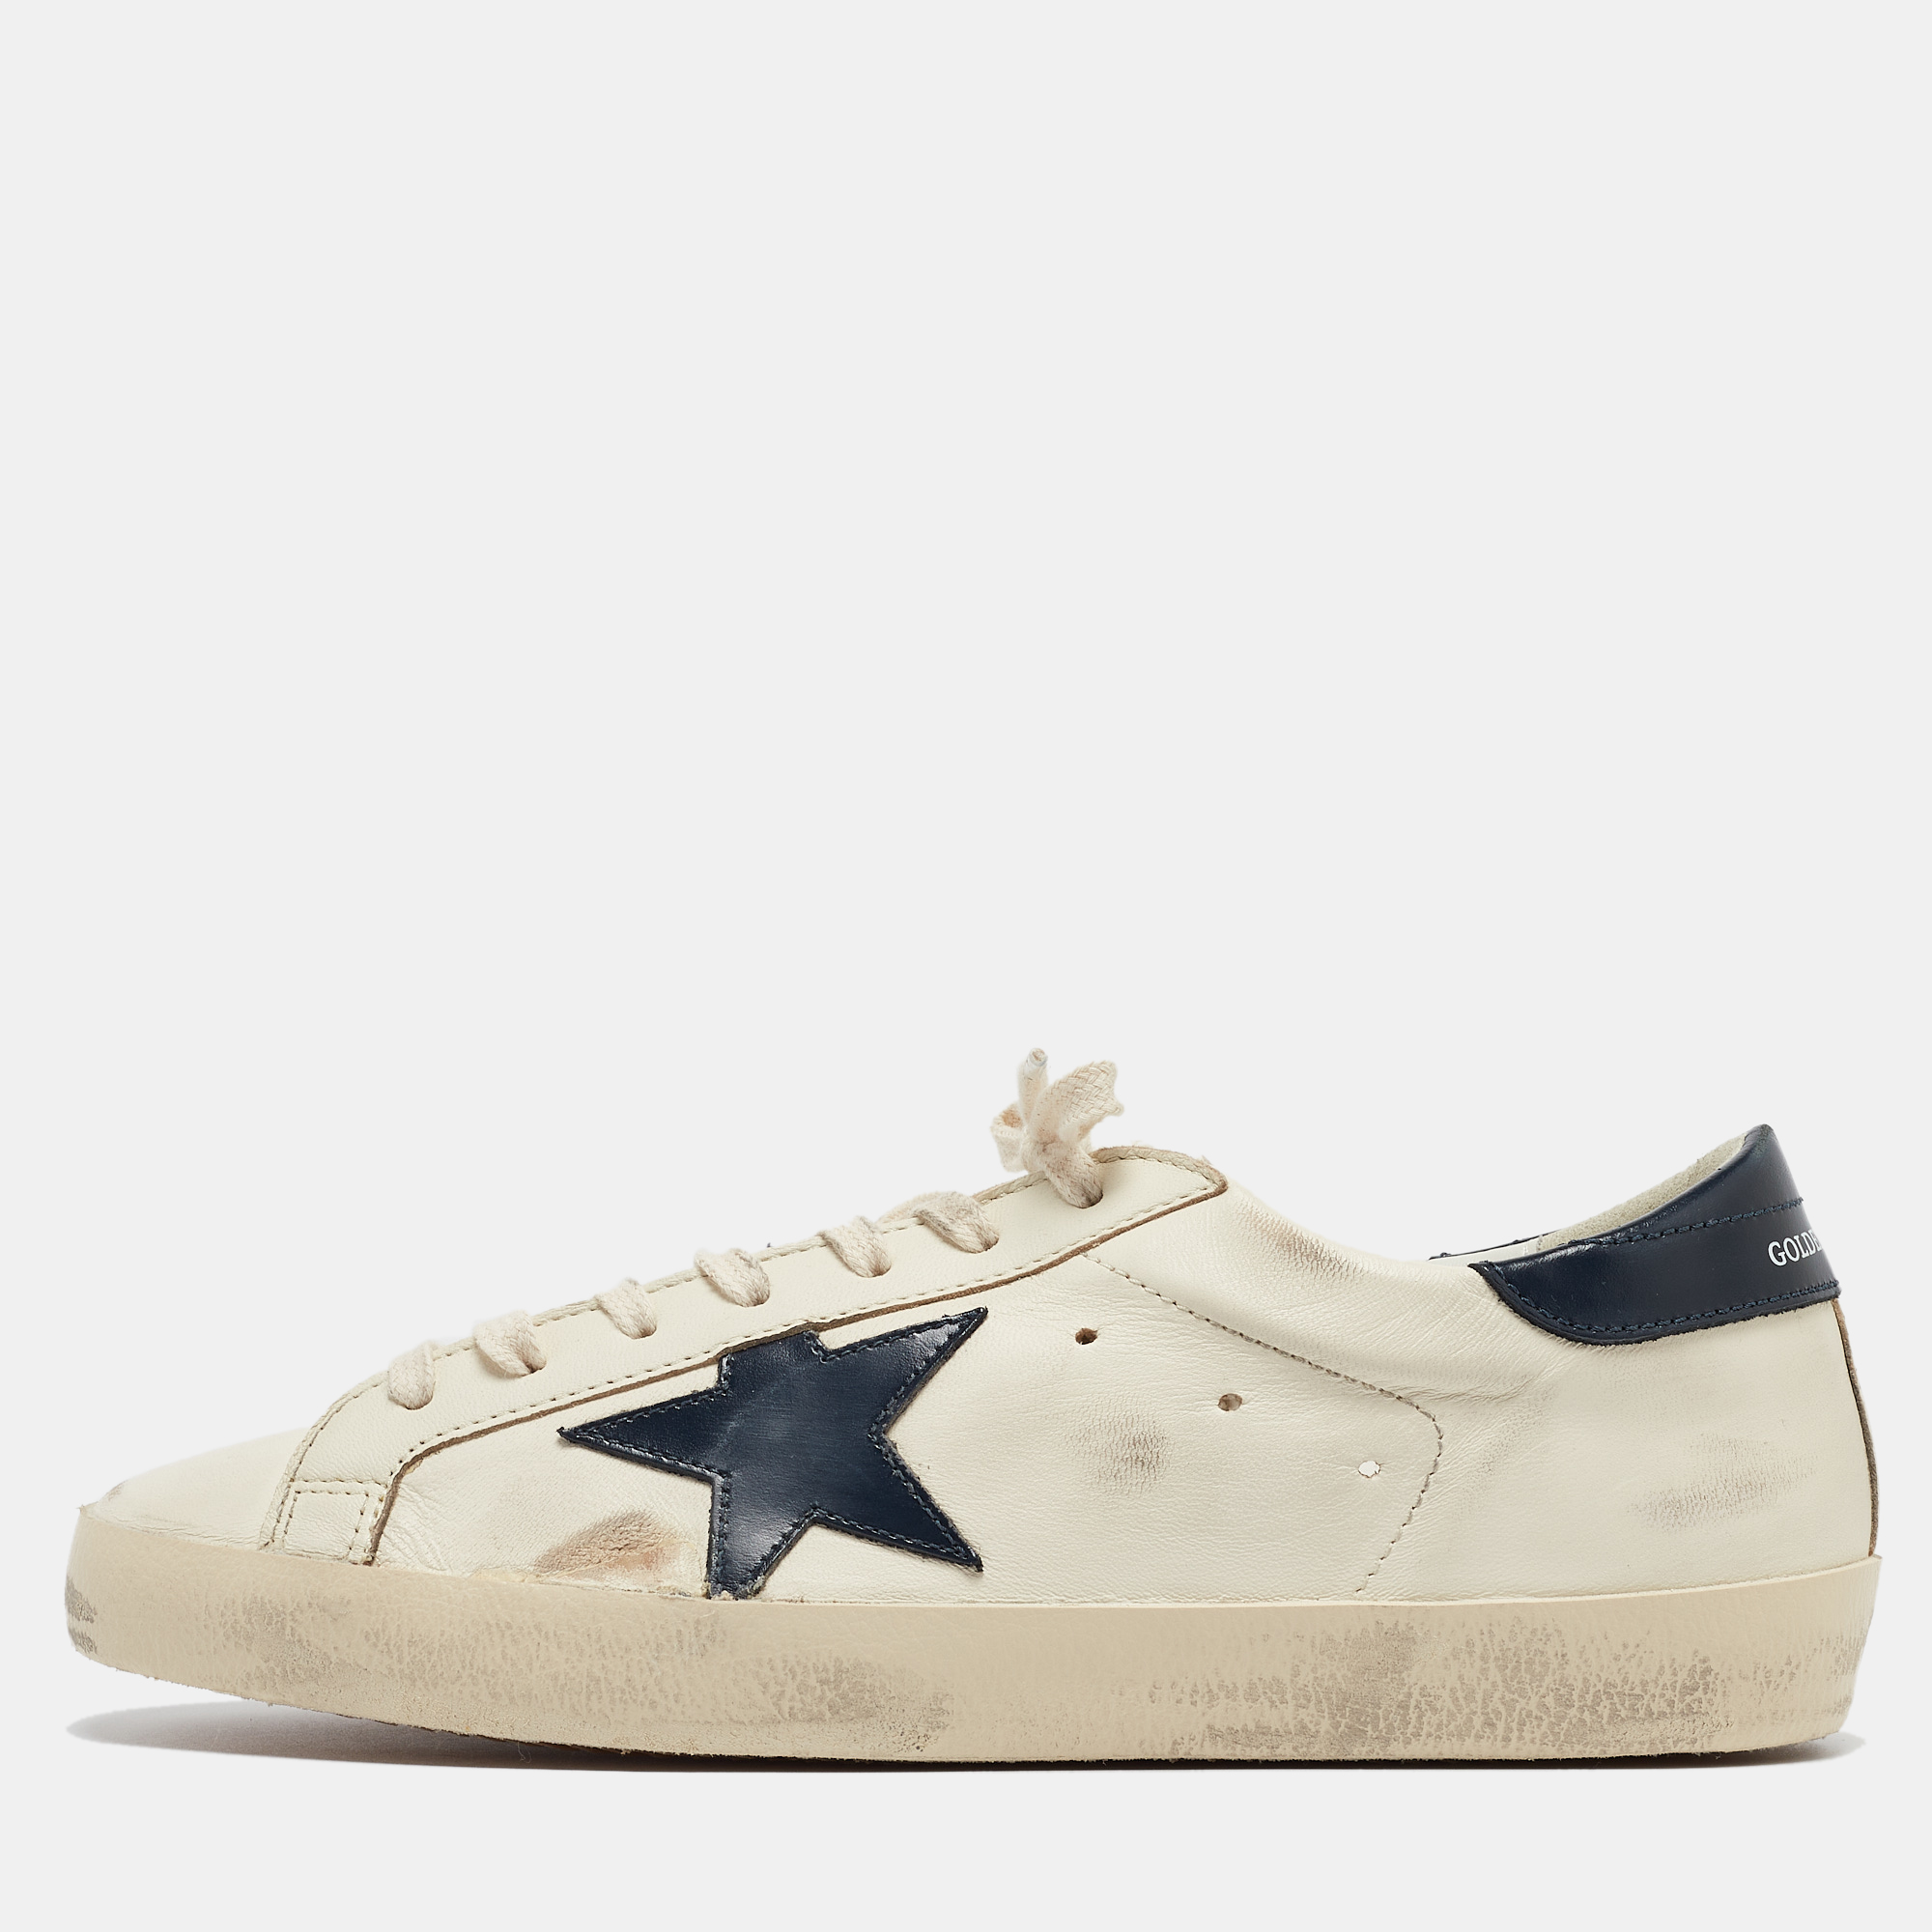 

Golden Goose Cream/Navy Blue Leather Superstar Sneakers Size